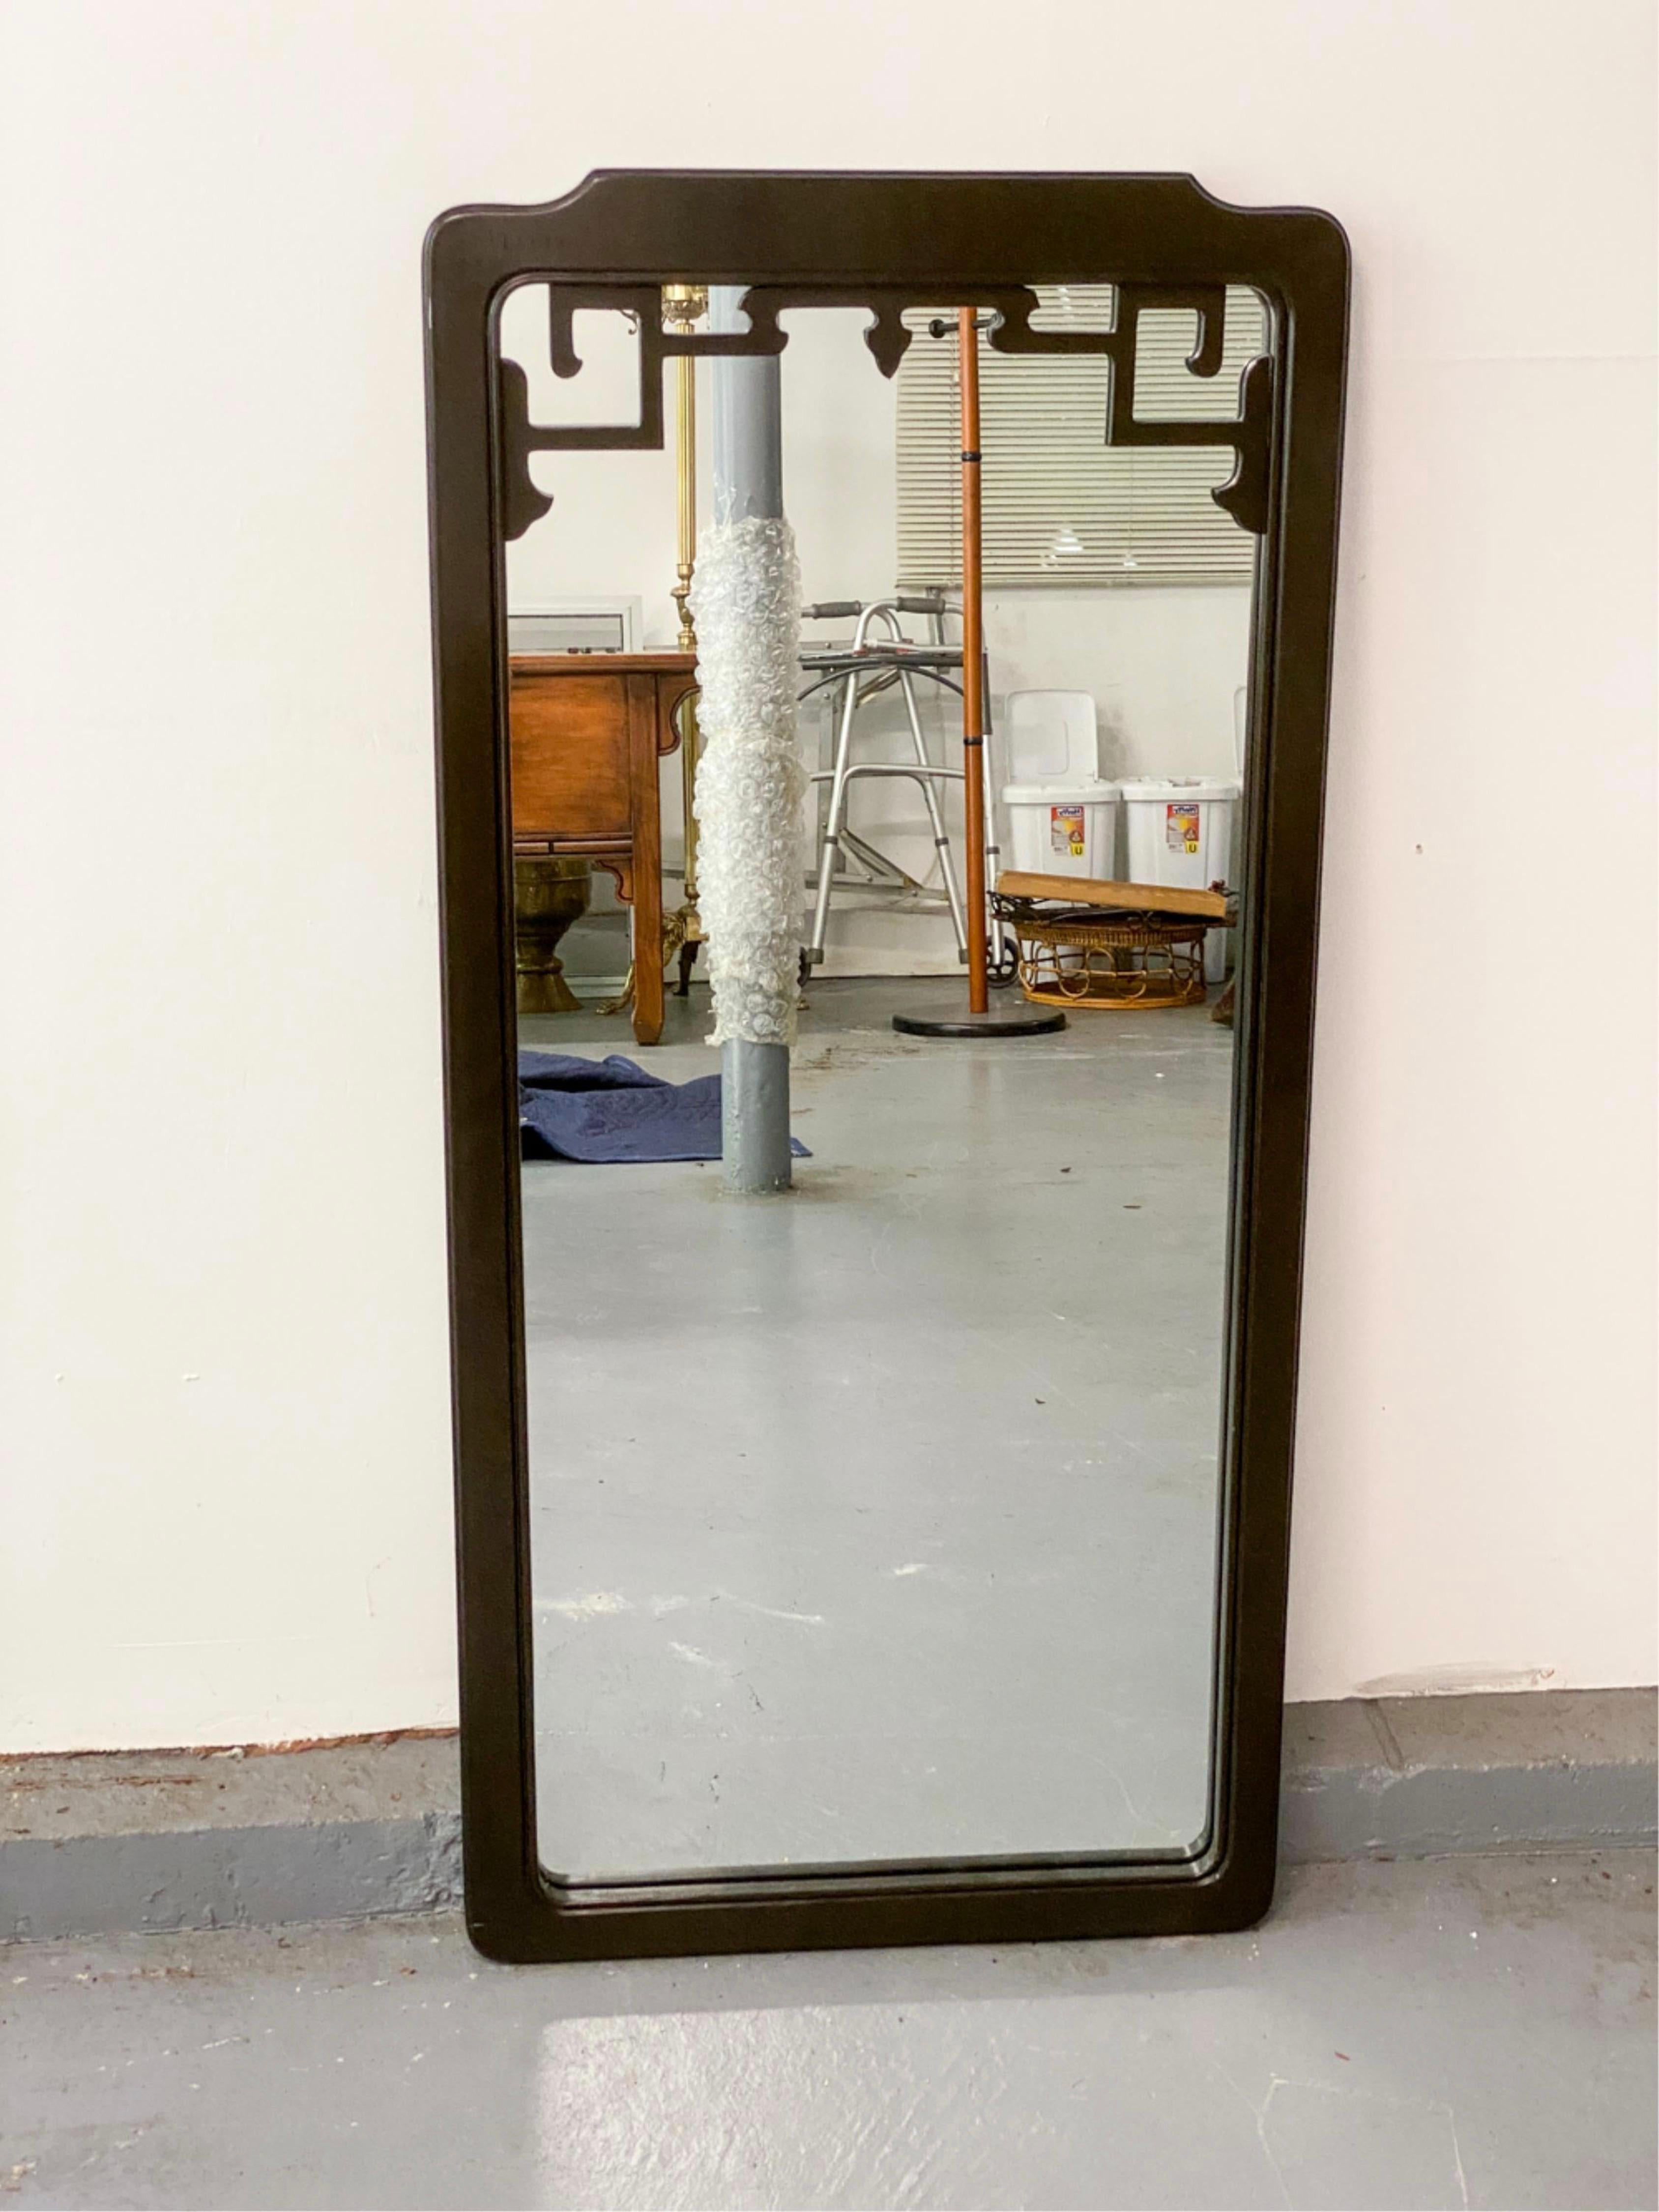 Simply elegant 1960s-1970s chinoiserie style mirror that can serve well as full length dressing mirror, hall mirror, wall mirror, console or pier mirror, floor mirror.